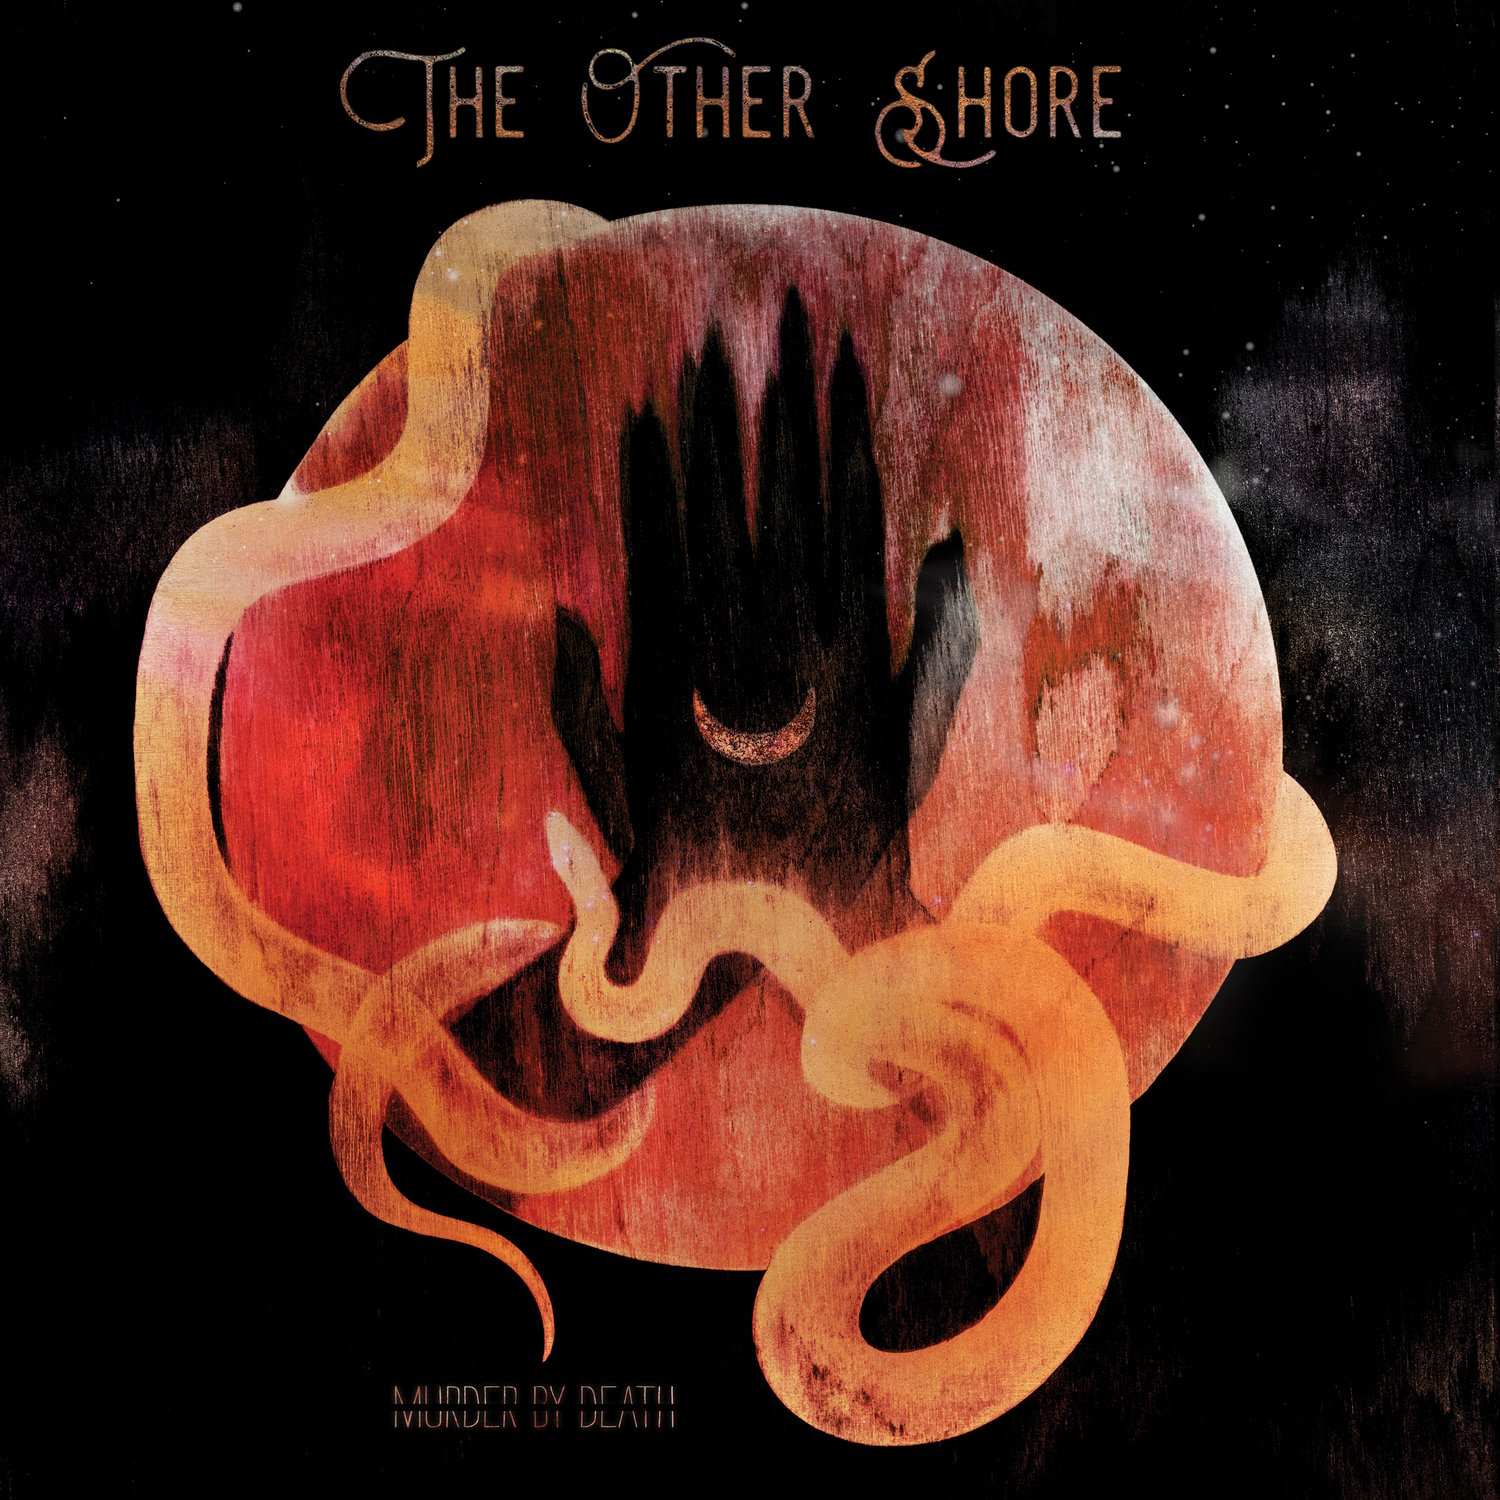 Image of Our New Album "The Other Shore" Standard Vinyl Edition